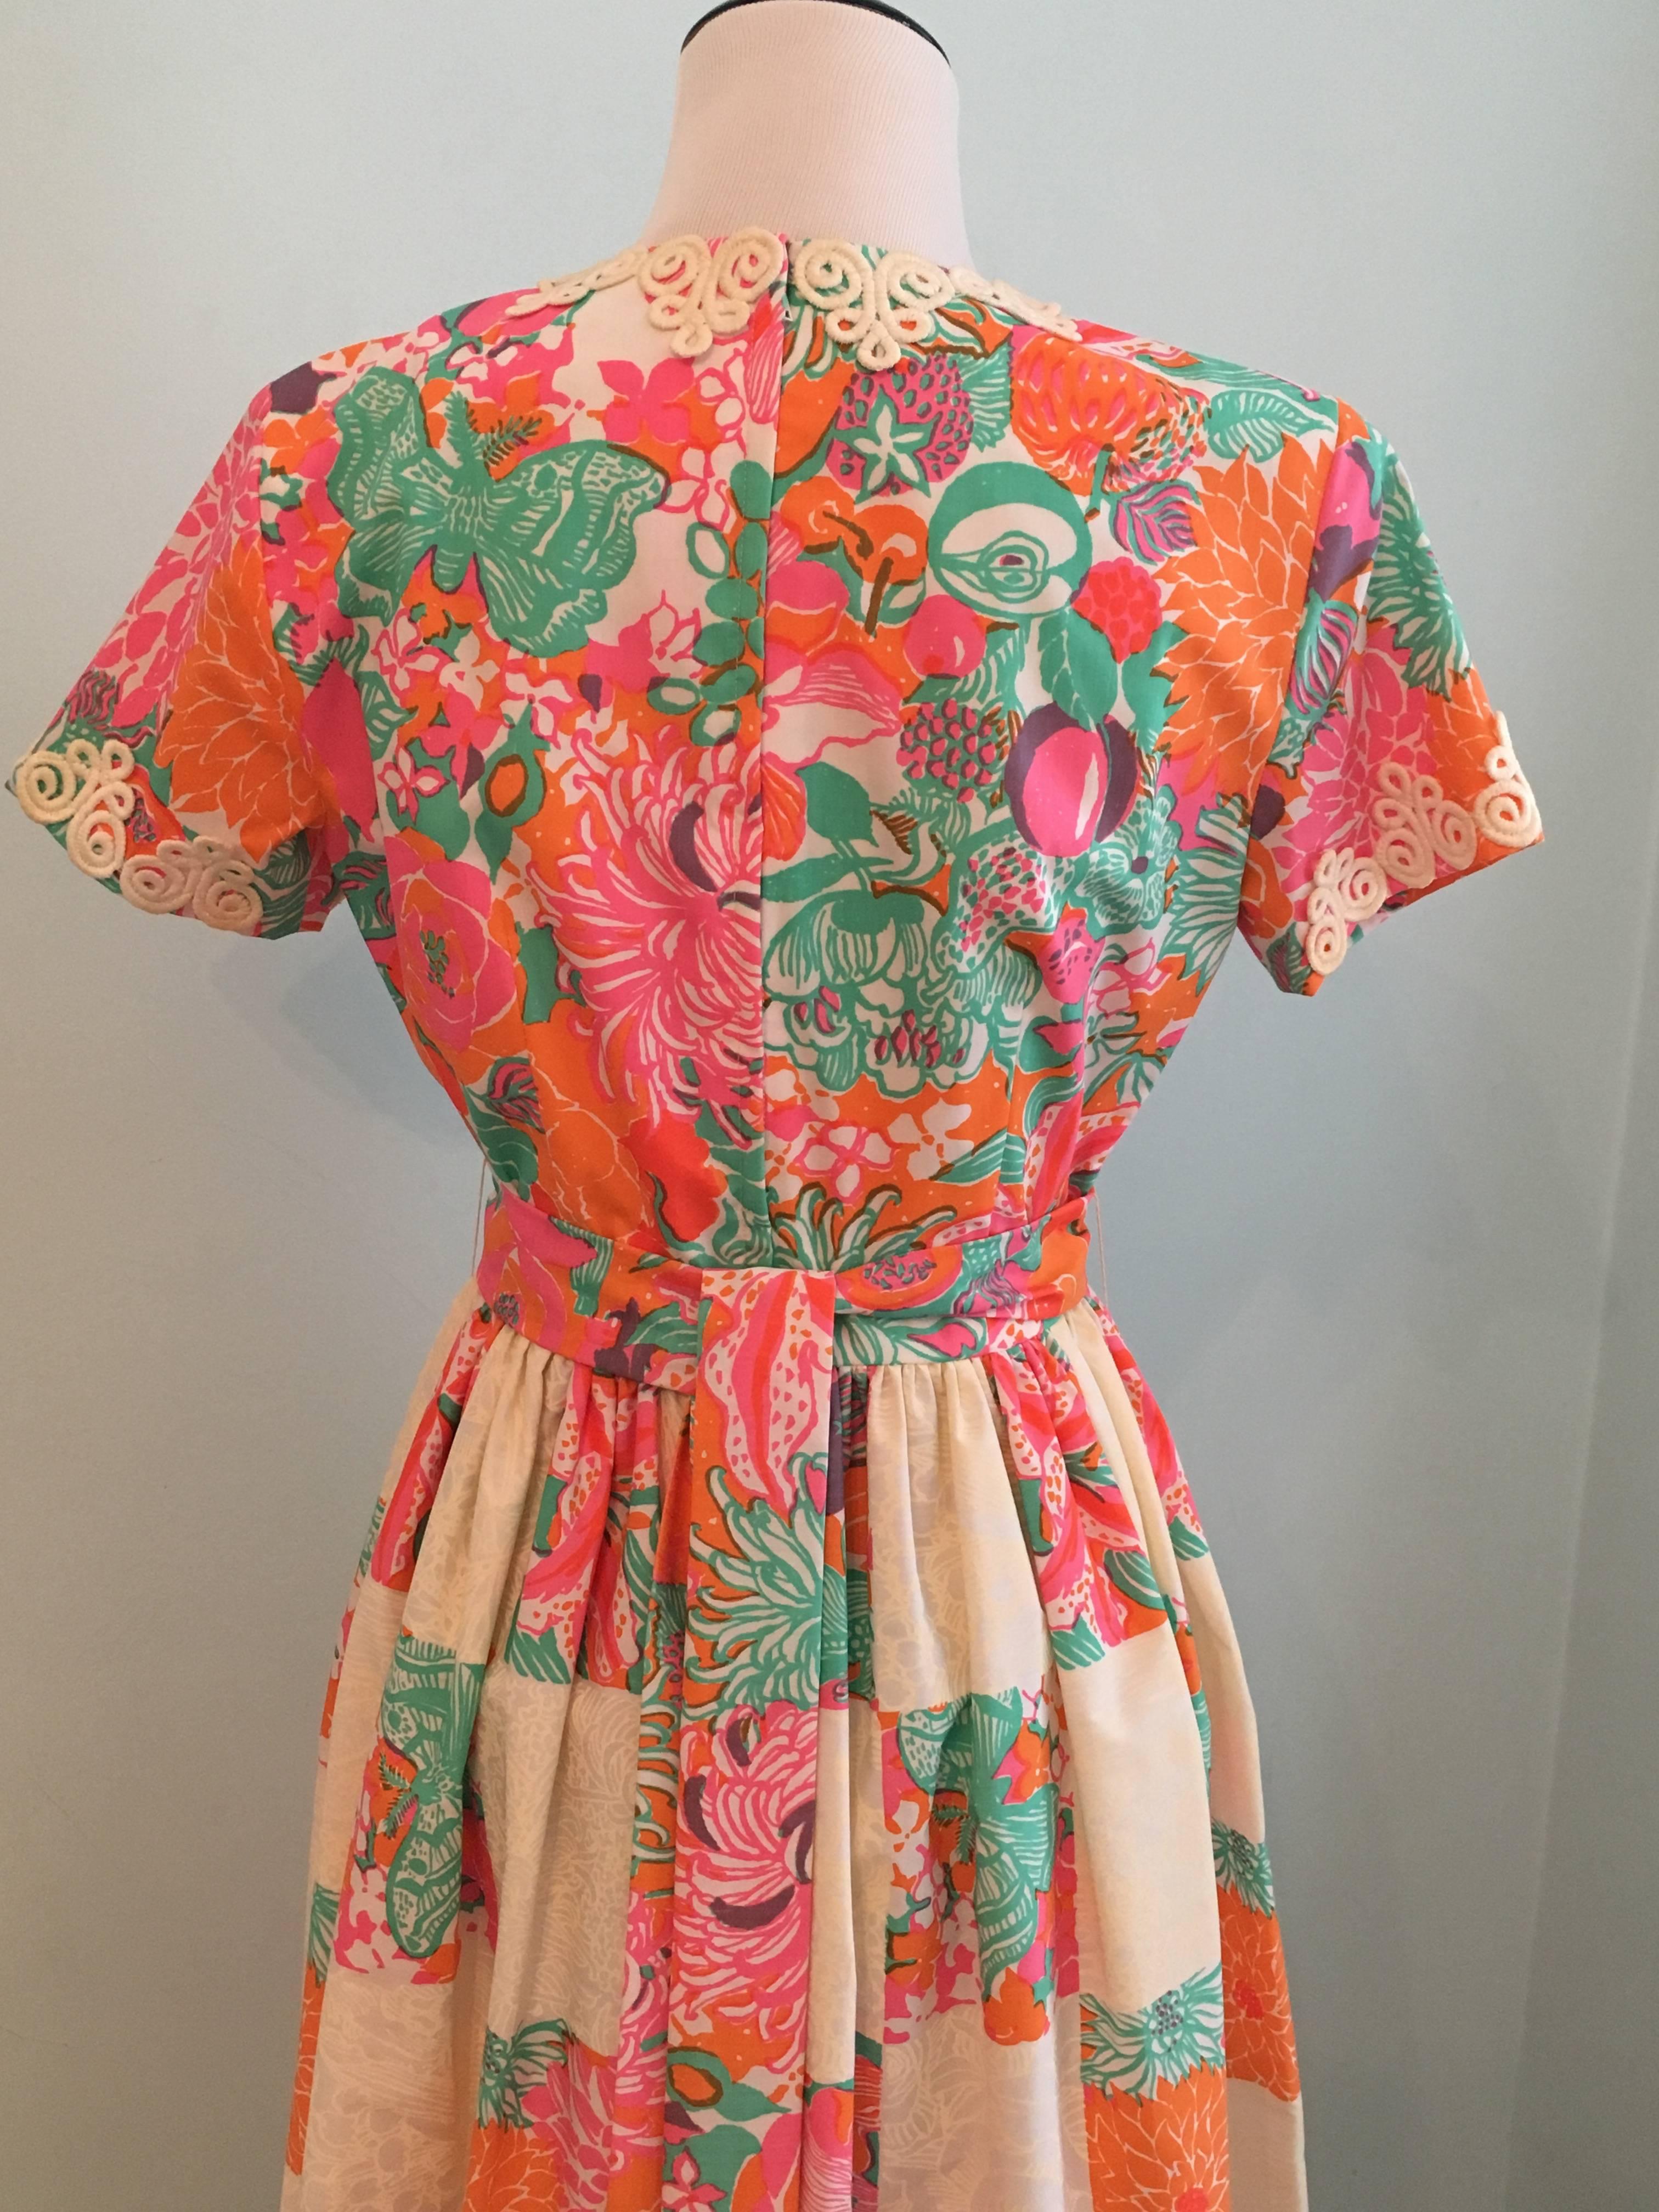 Lilly Pulitzer Maxi Dress with Patchwork Print Skirt, 1960s For Sale 2